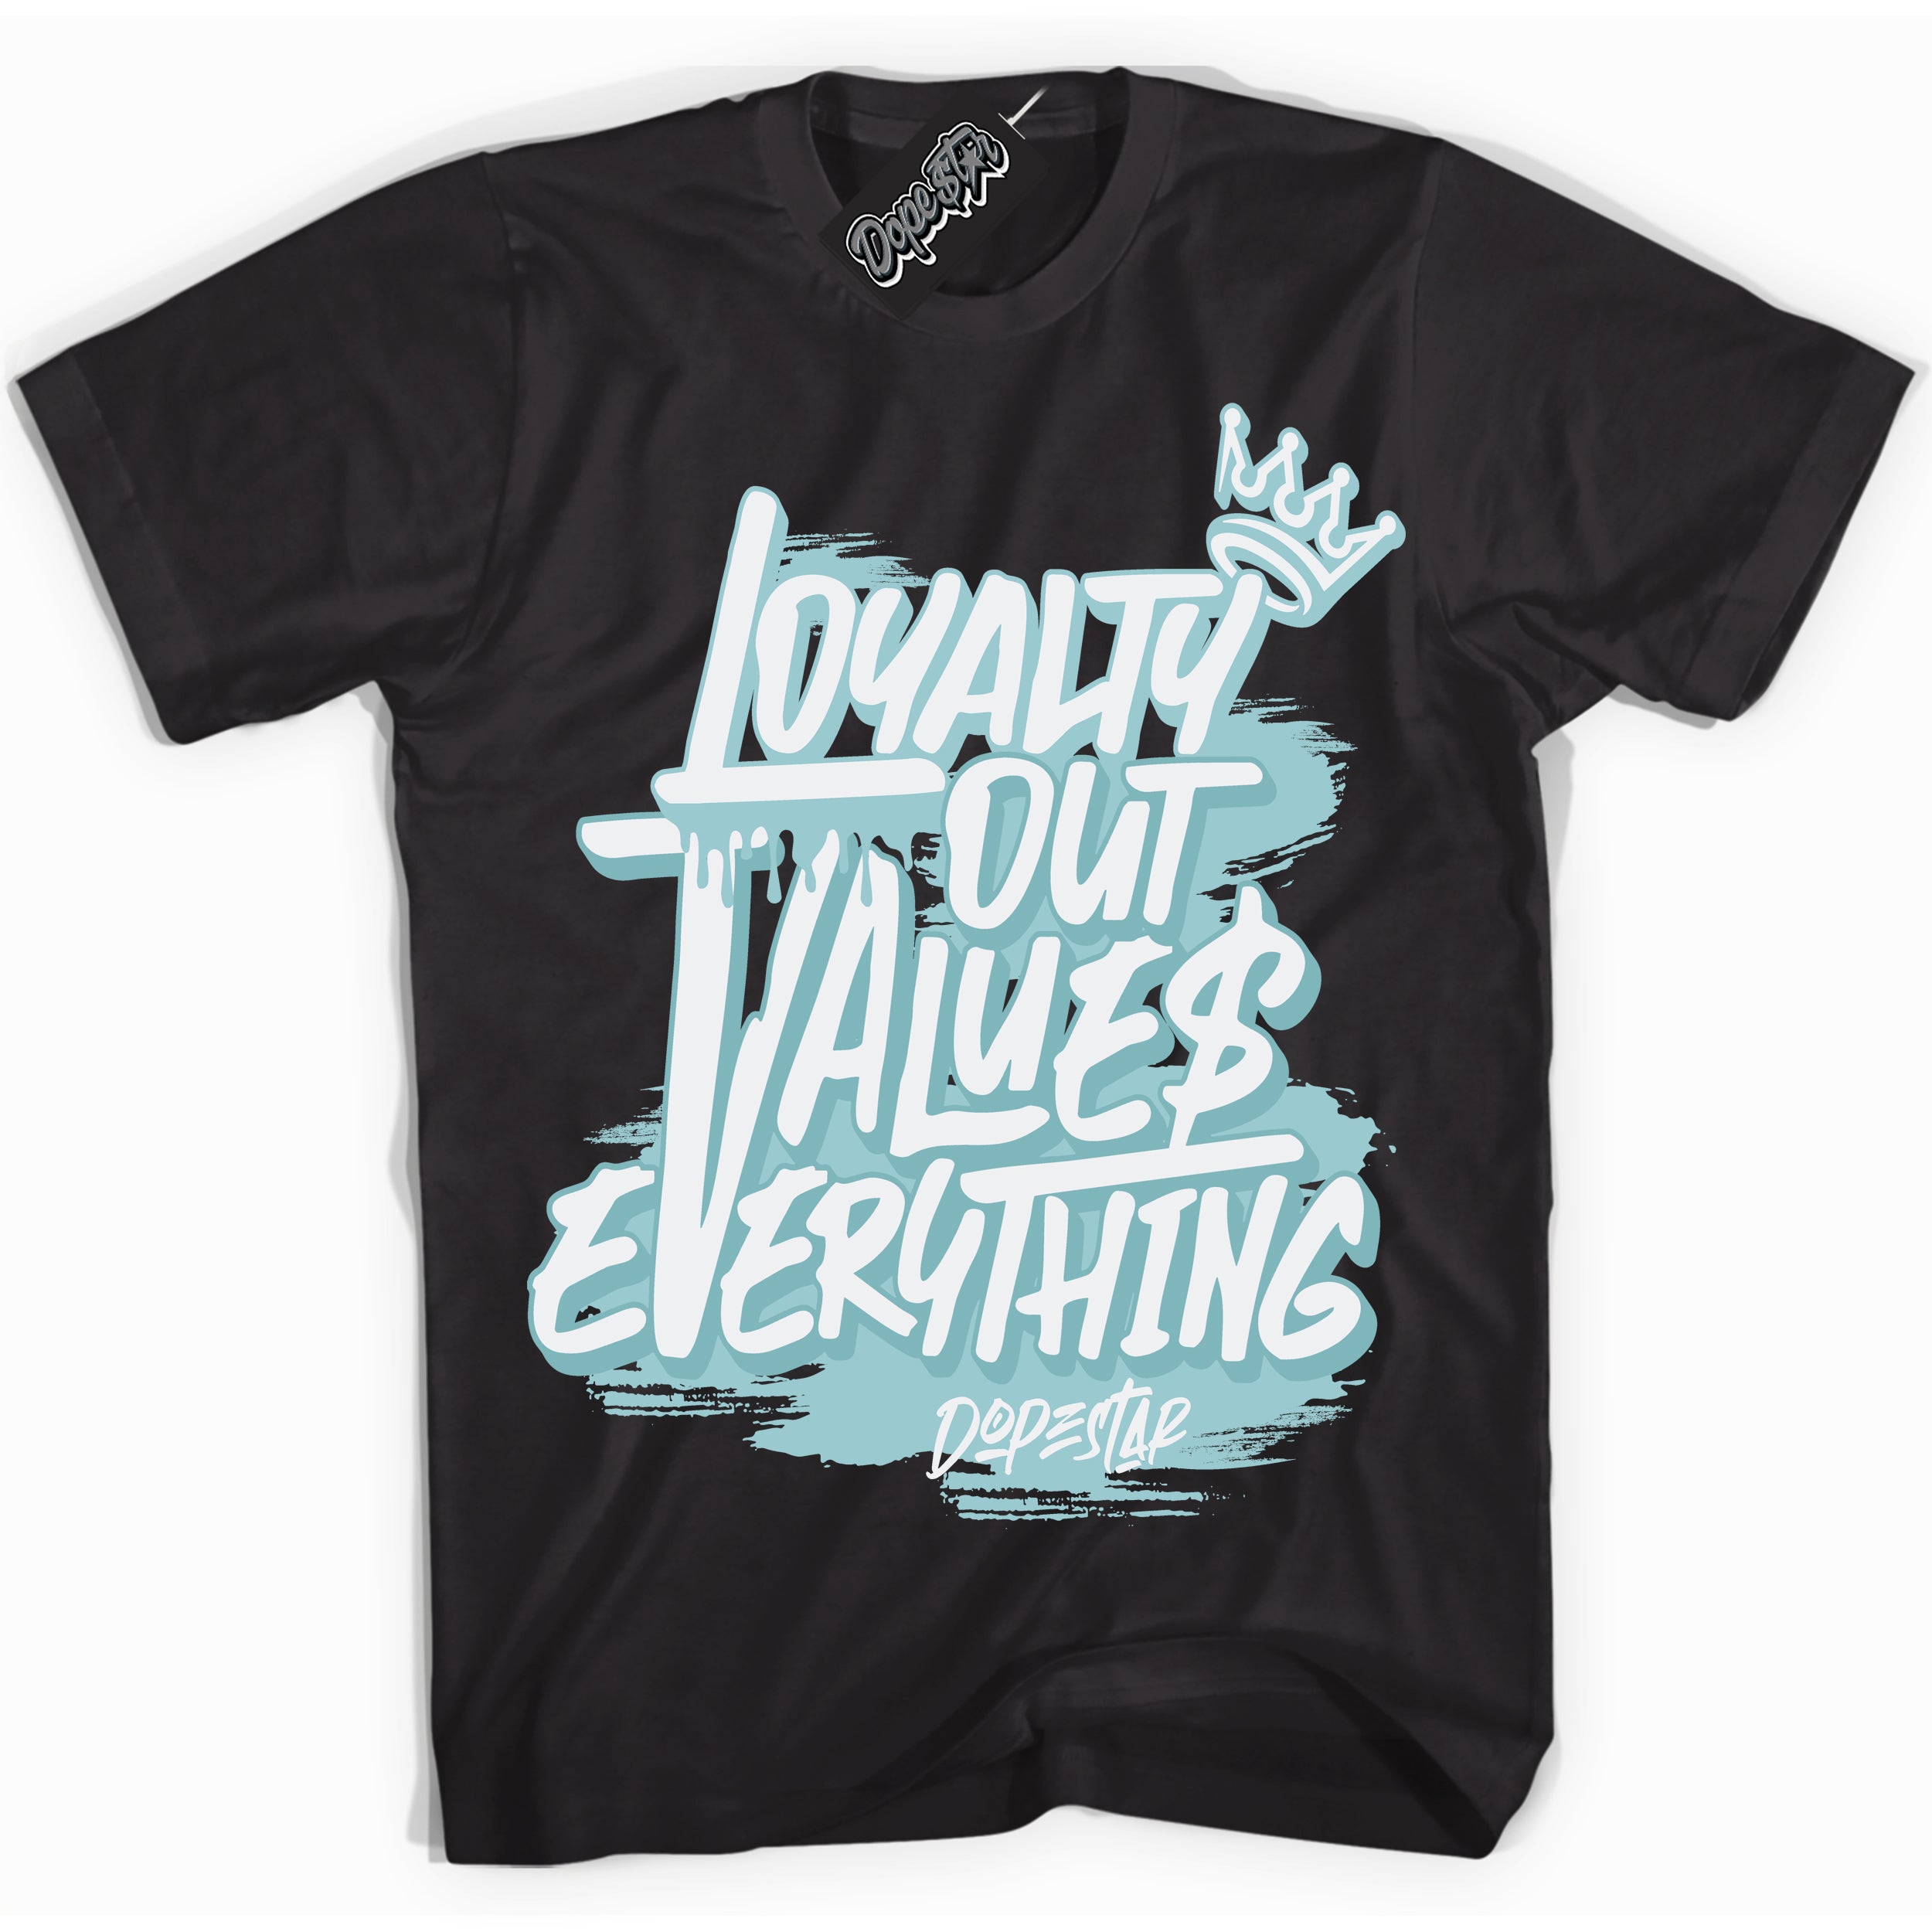 Cool Black Shirt with “ Loyalty Out Values Everything” design that perfectly matches AJKO Bleached Aqua 1s Sneakers.